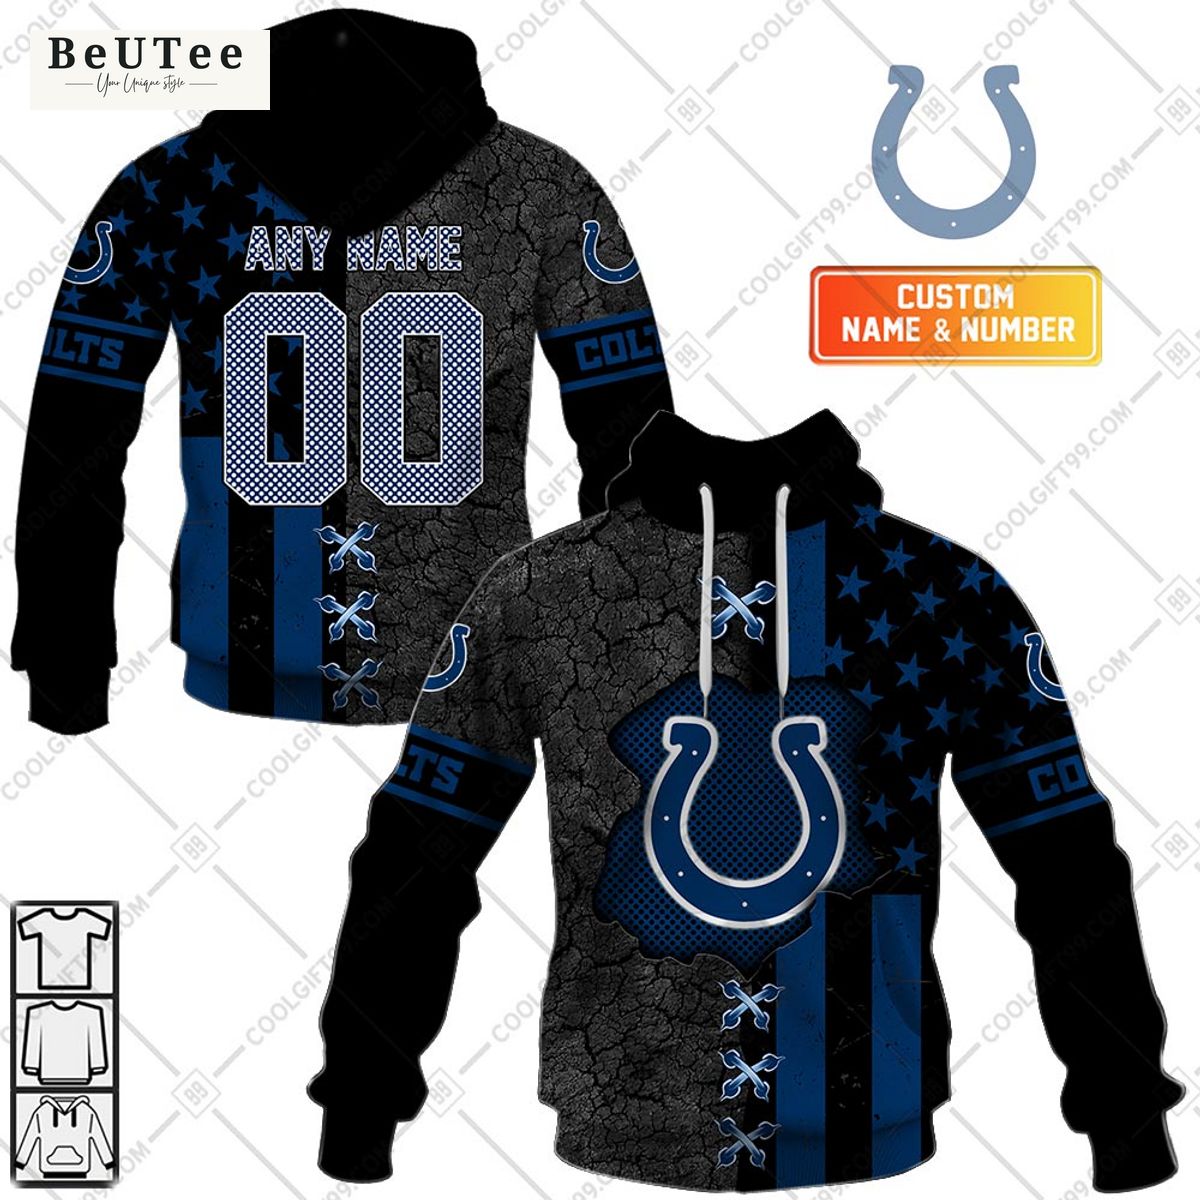 personalized indianapolis colts nfl printed hoodie shirt 1 CNOfn.jpg